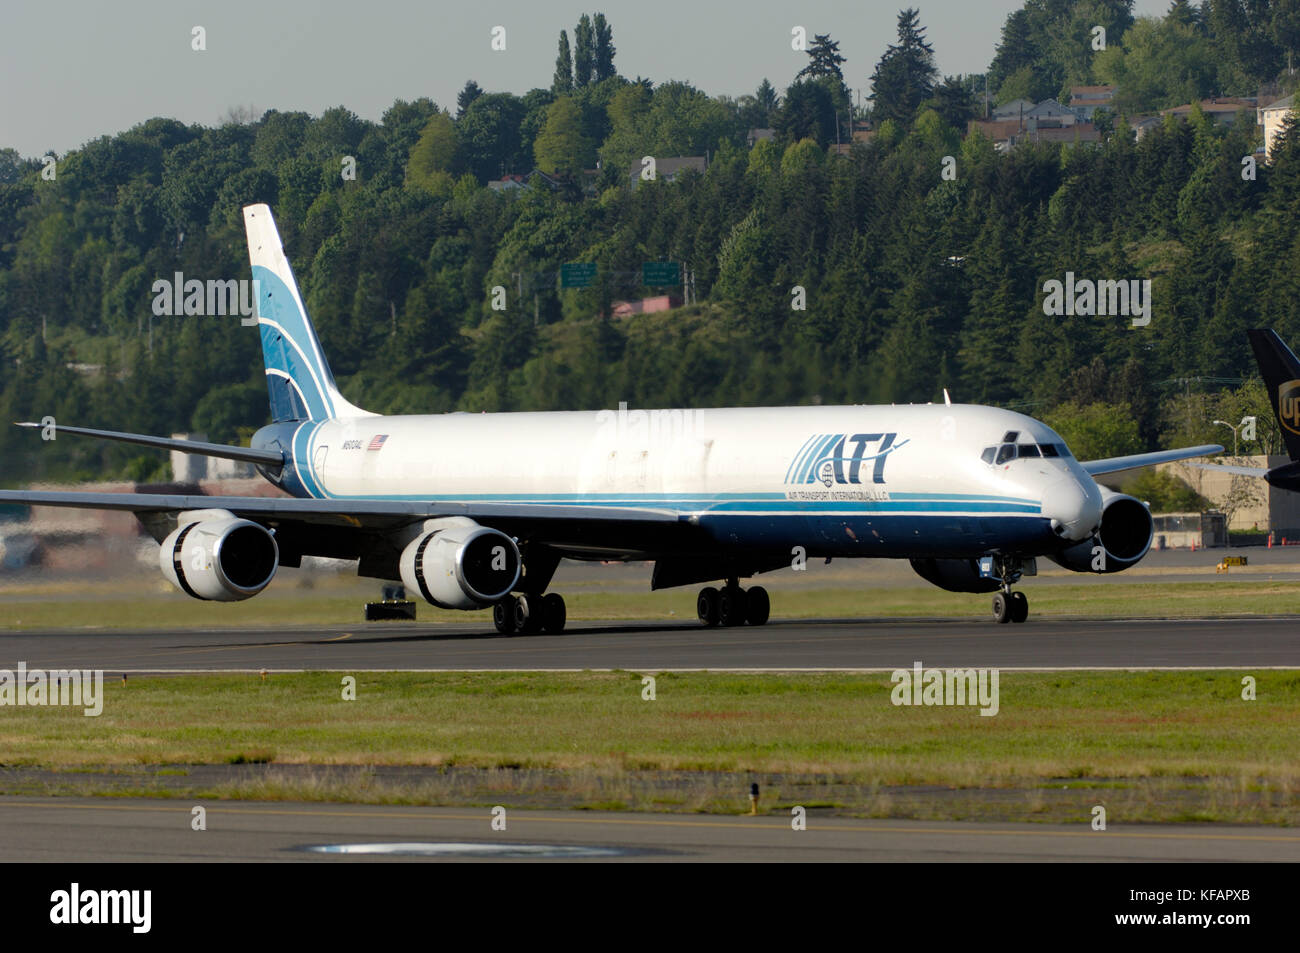 Une carte ATI - Air Transport International McDonnell Douglas DC-8-73F taxiing Banque D'Images